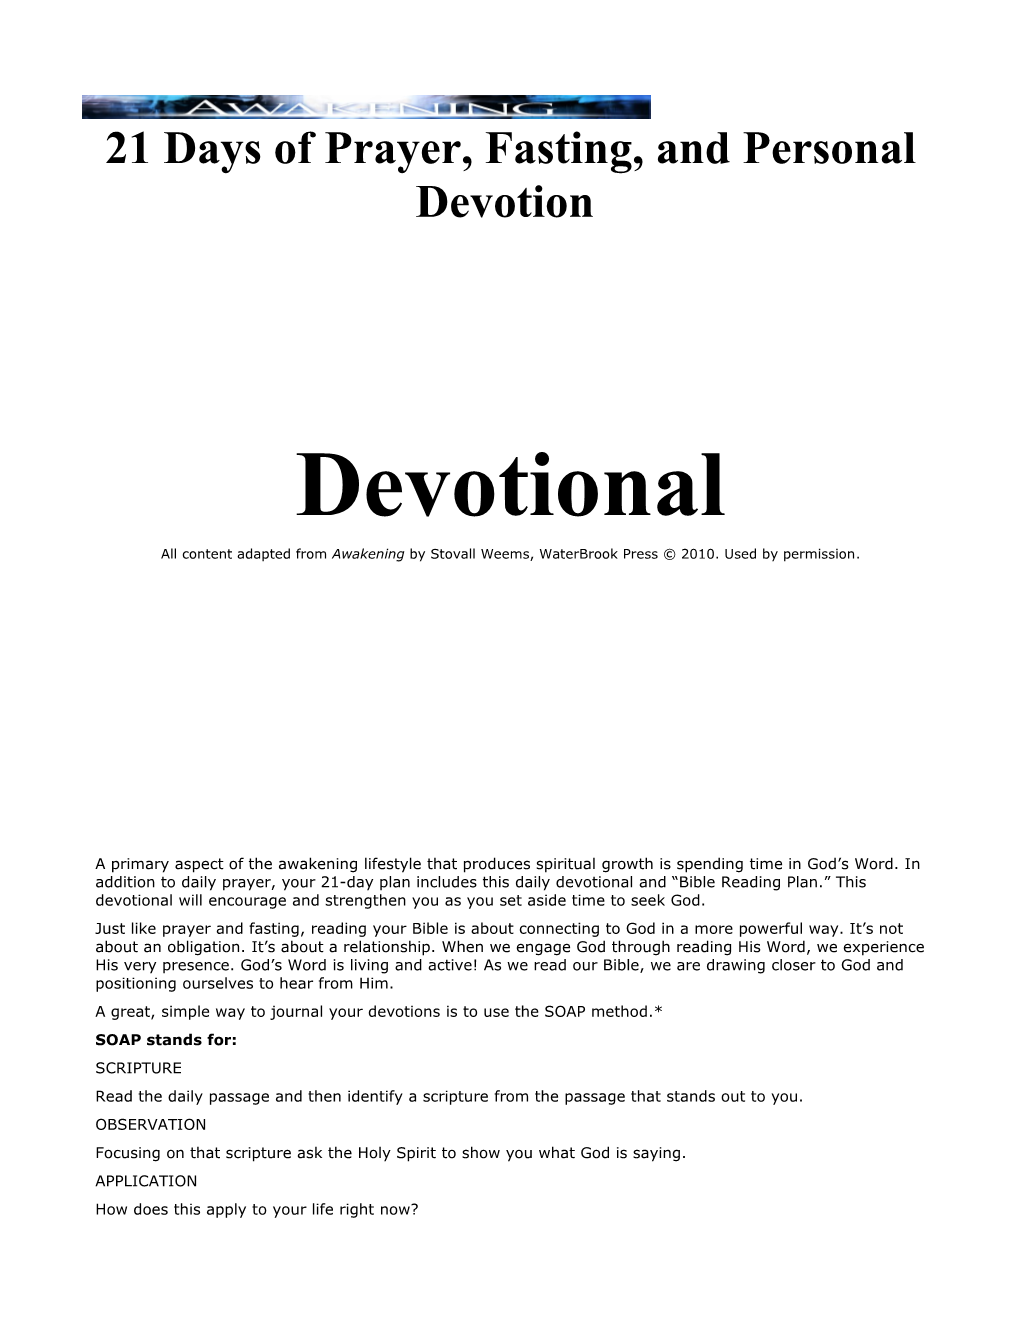 21 Days of Prayer, Fasting, and Personal Devotion